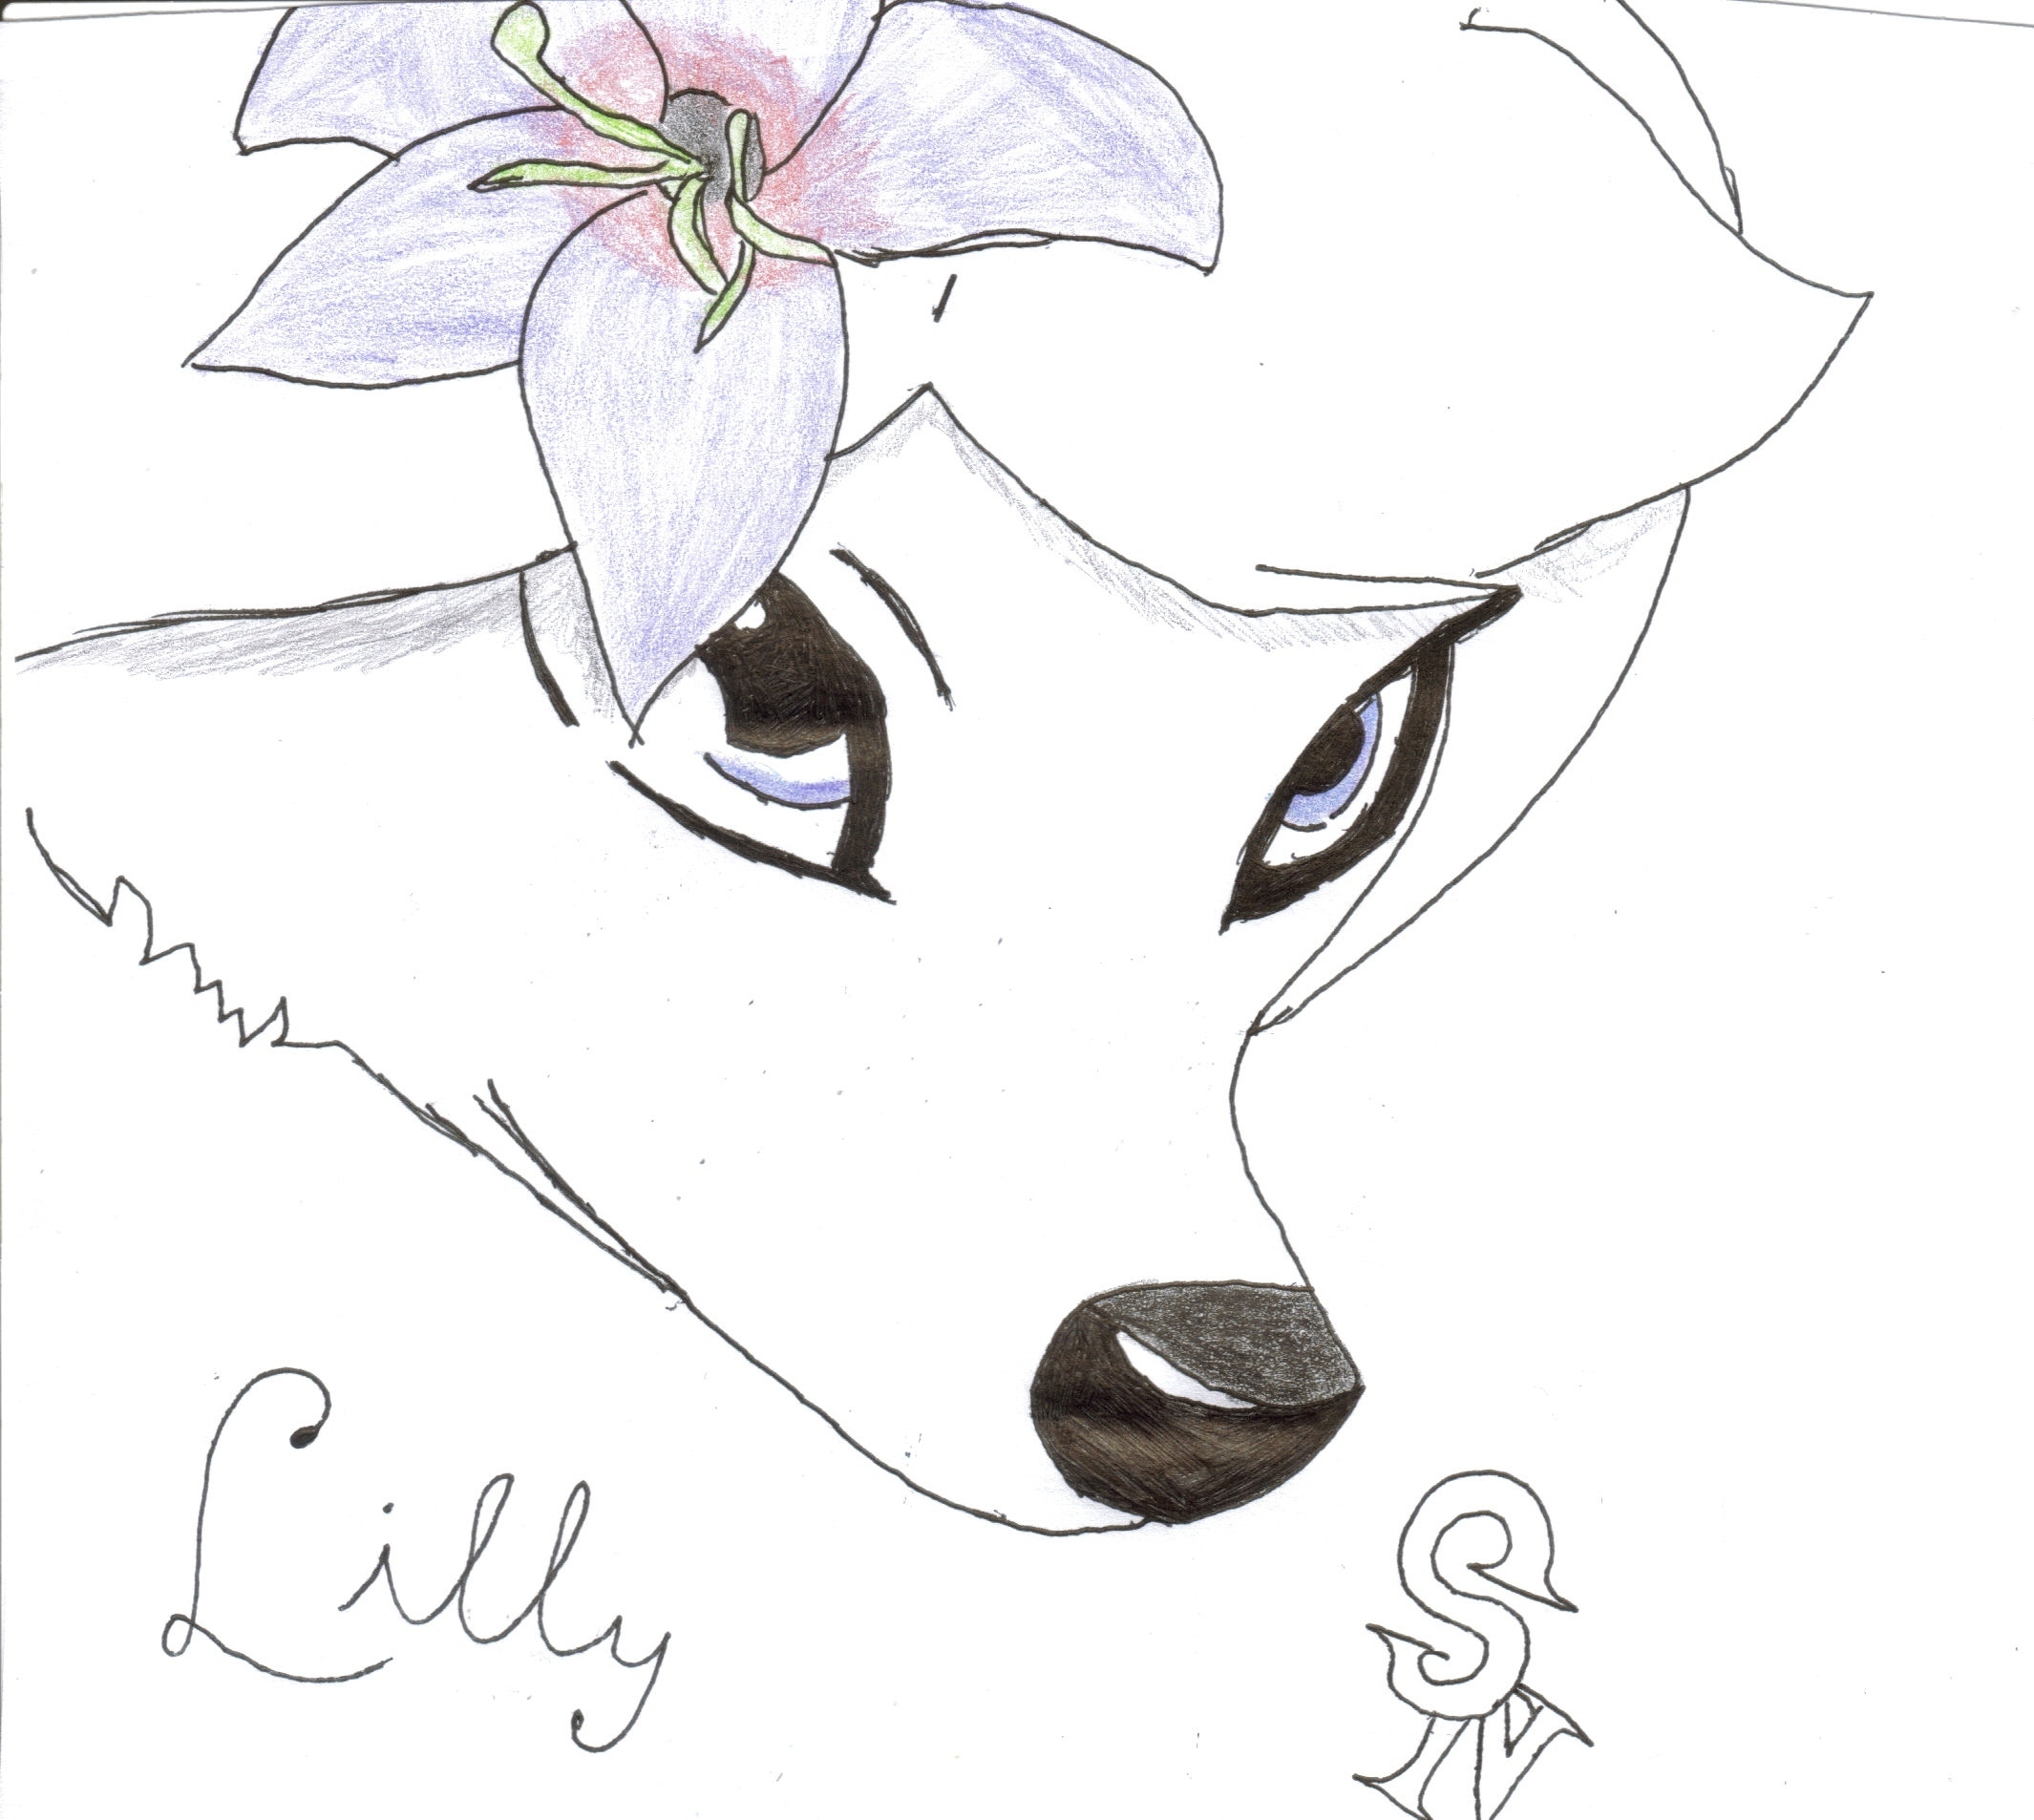 Lilly drawing